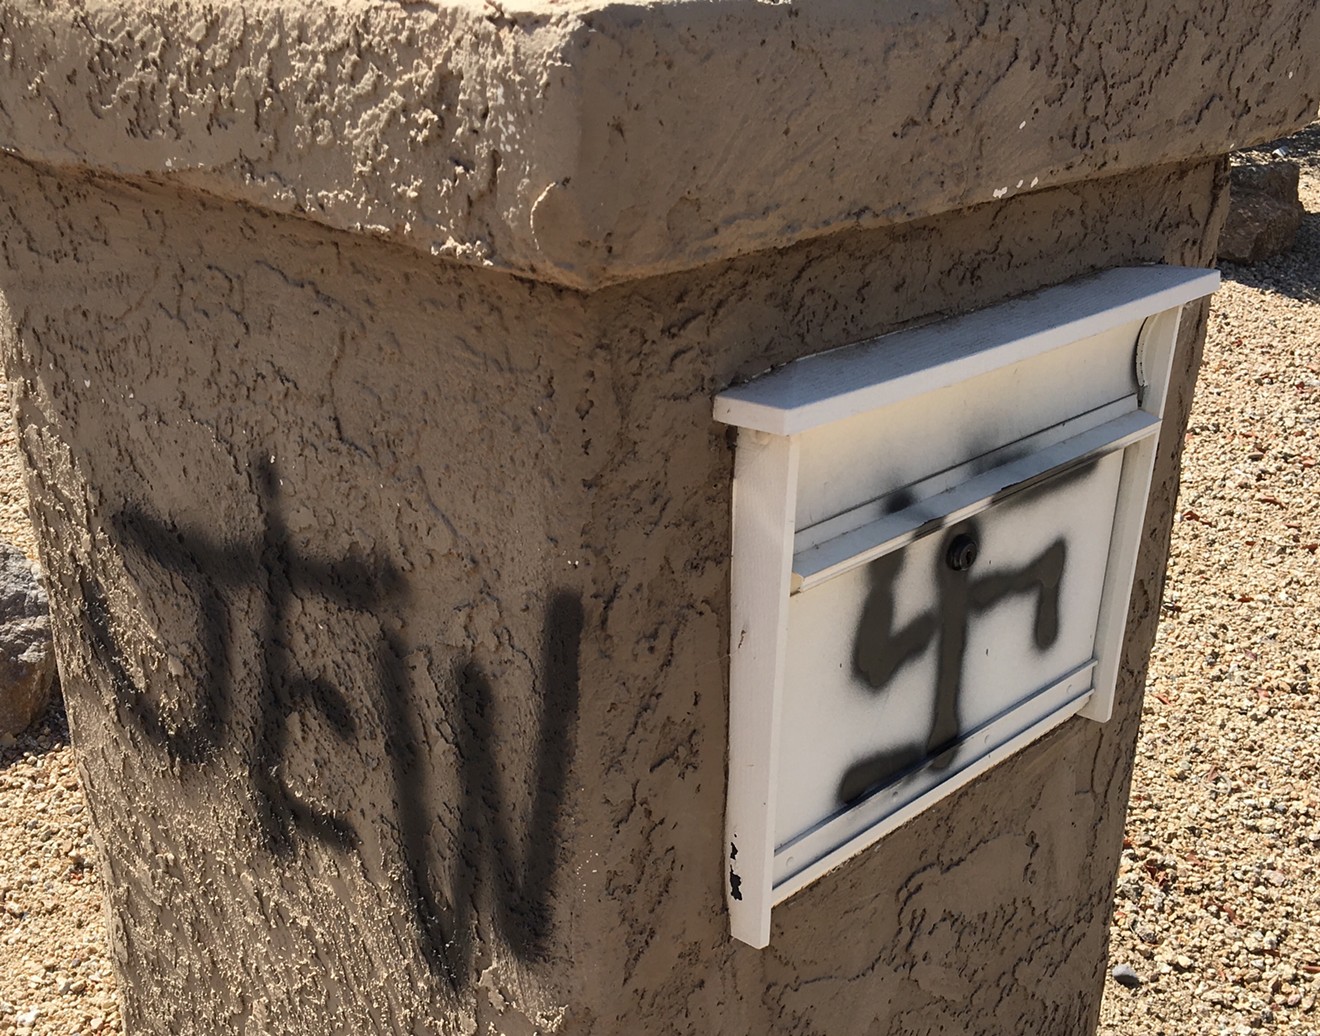 Anti-Semitic incidents surged in Arizona last year, according to the Anti-Defamation League.